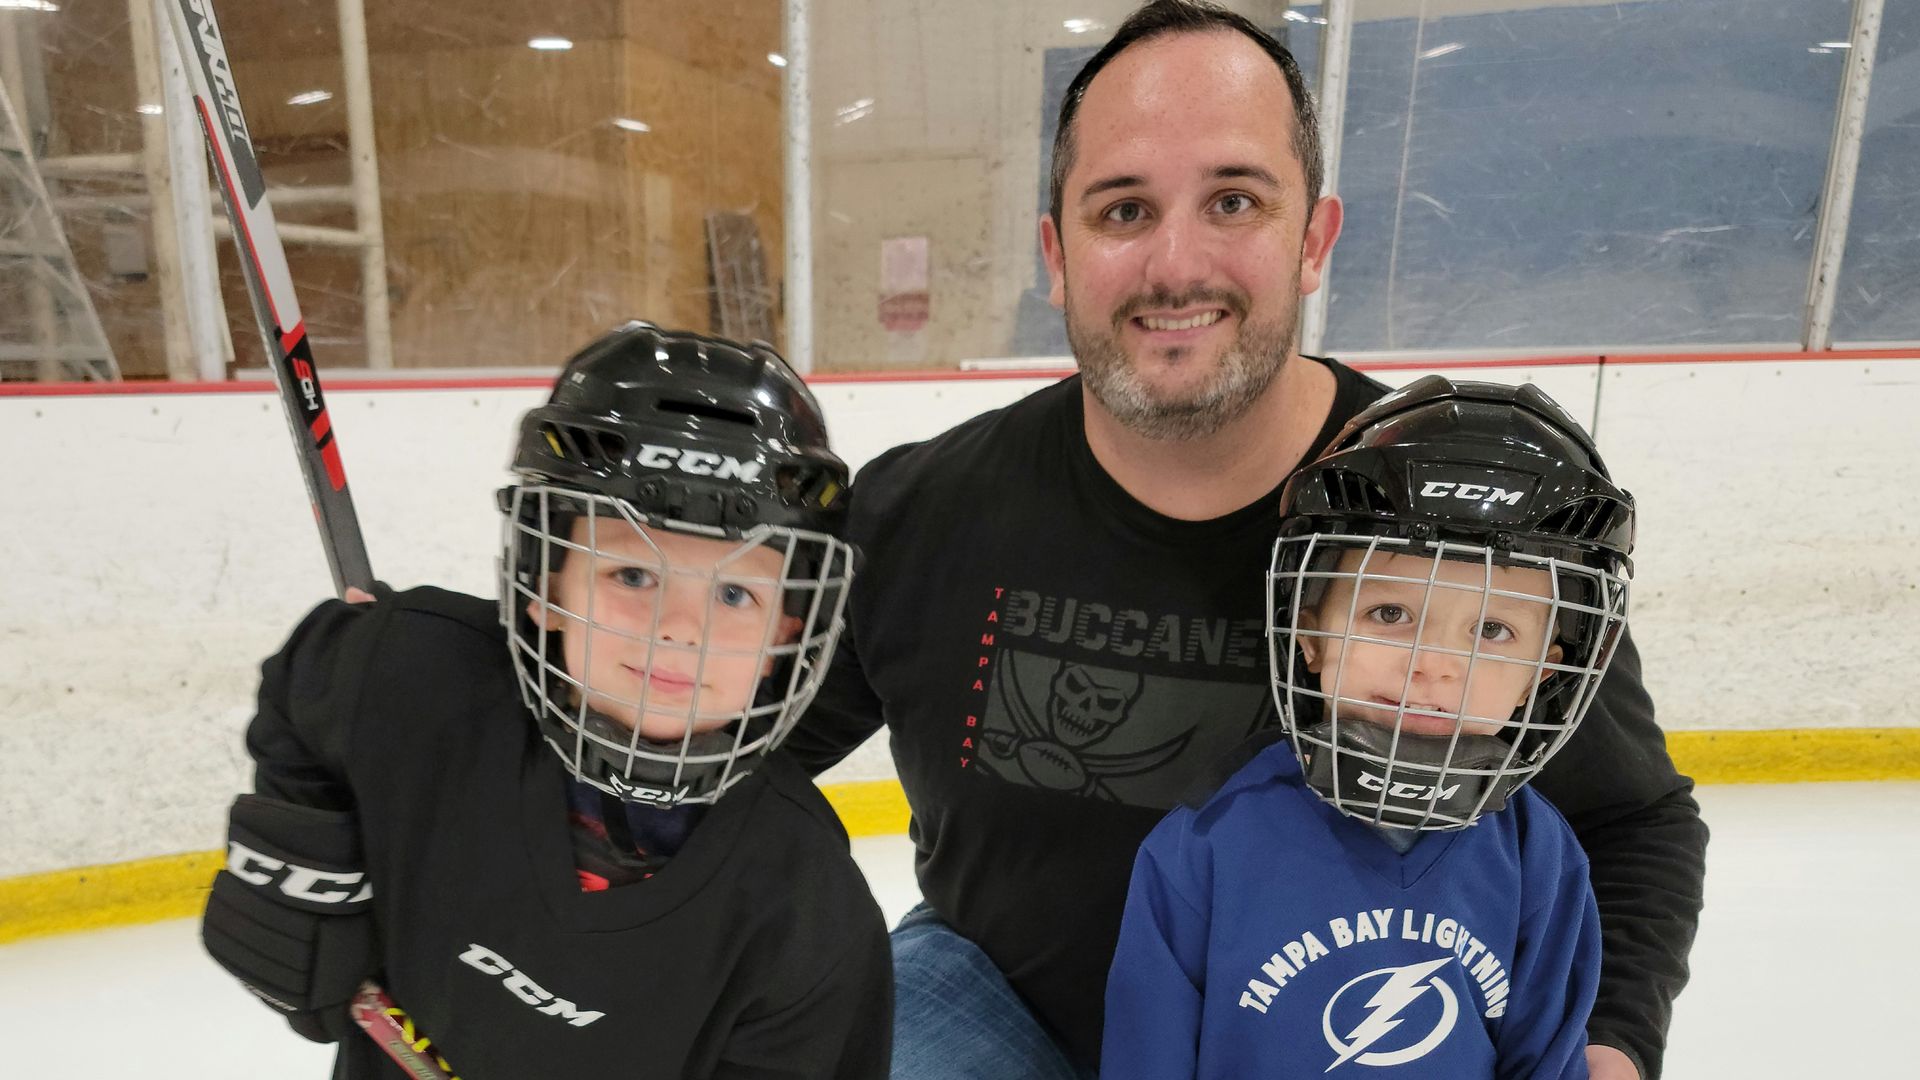 Kevin goodwin and his kids in their hockey gear